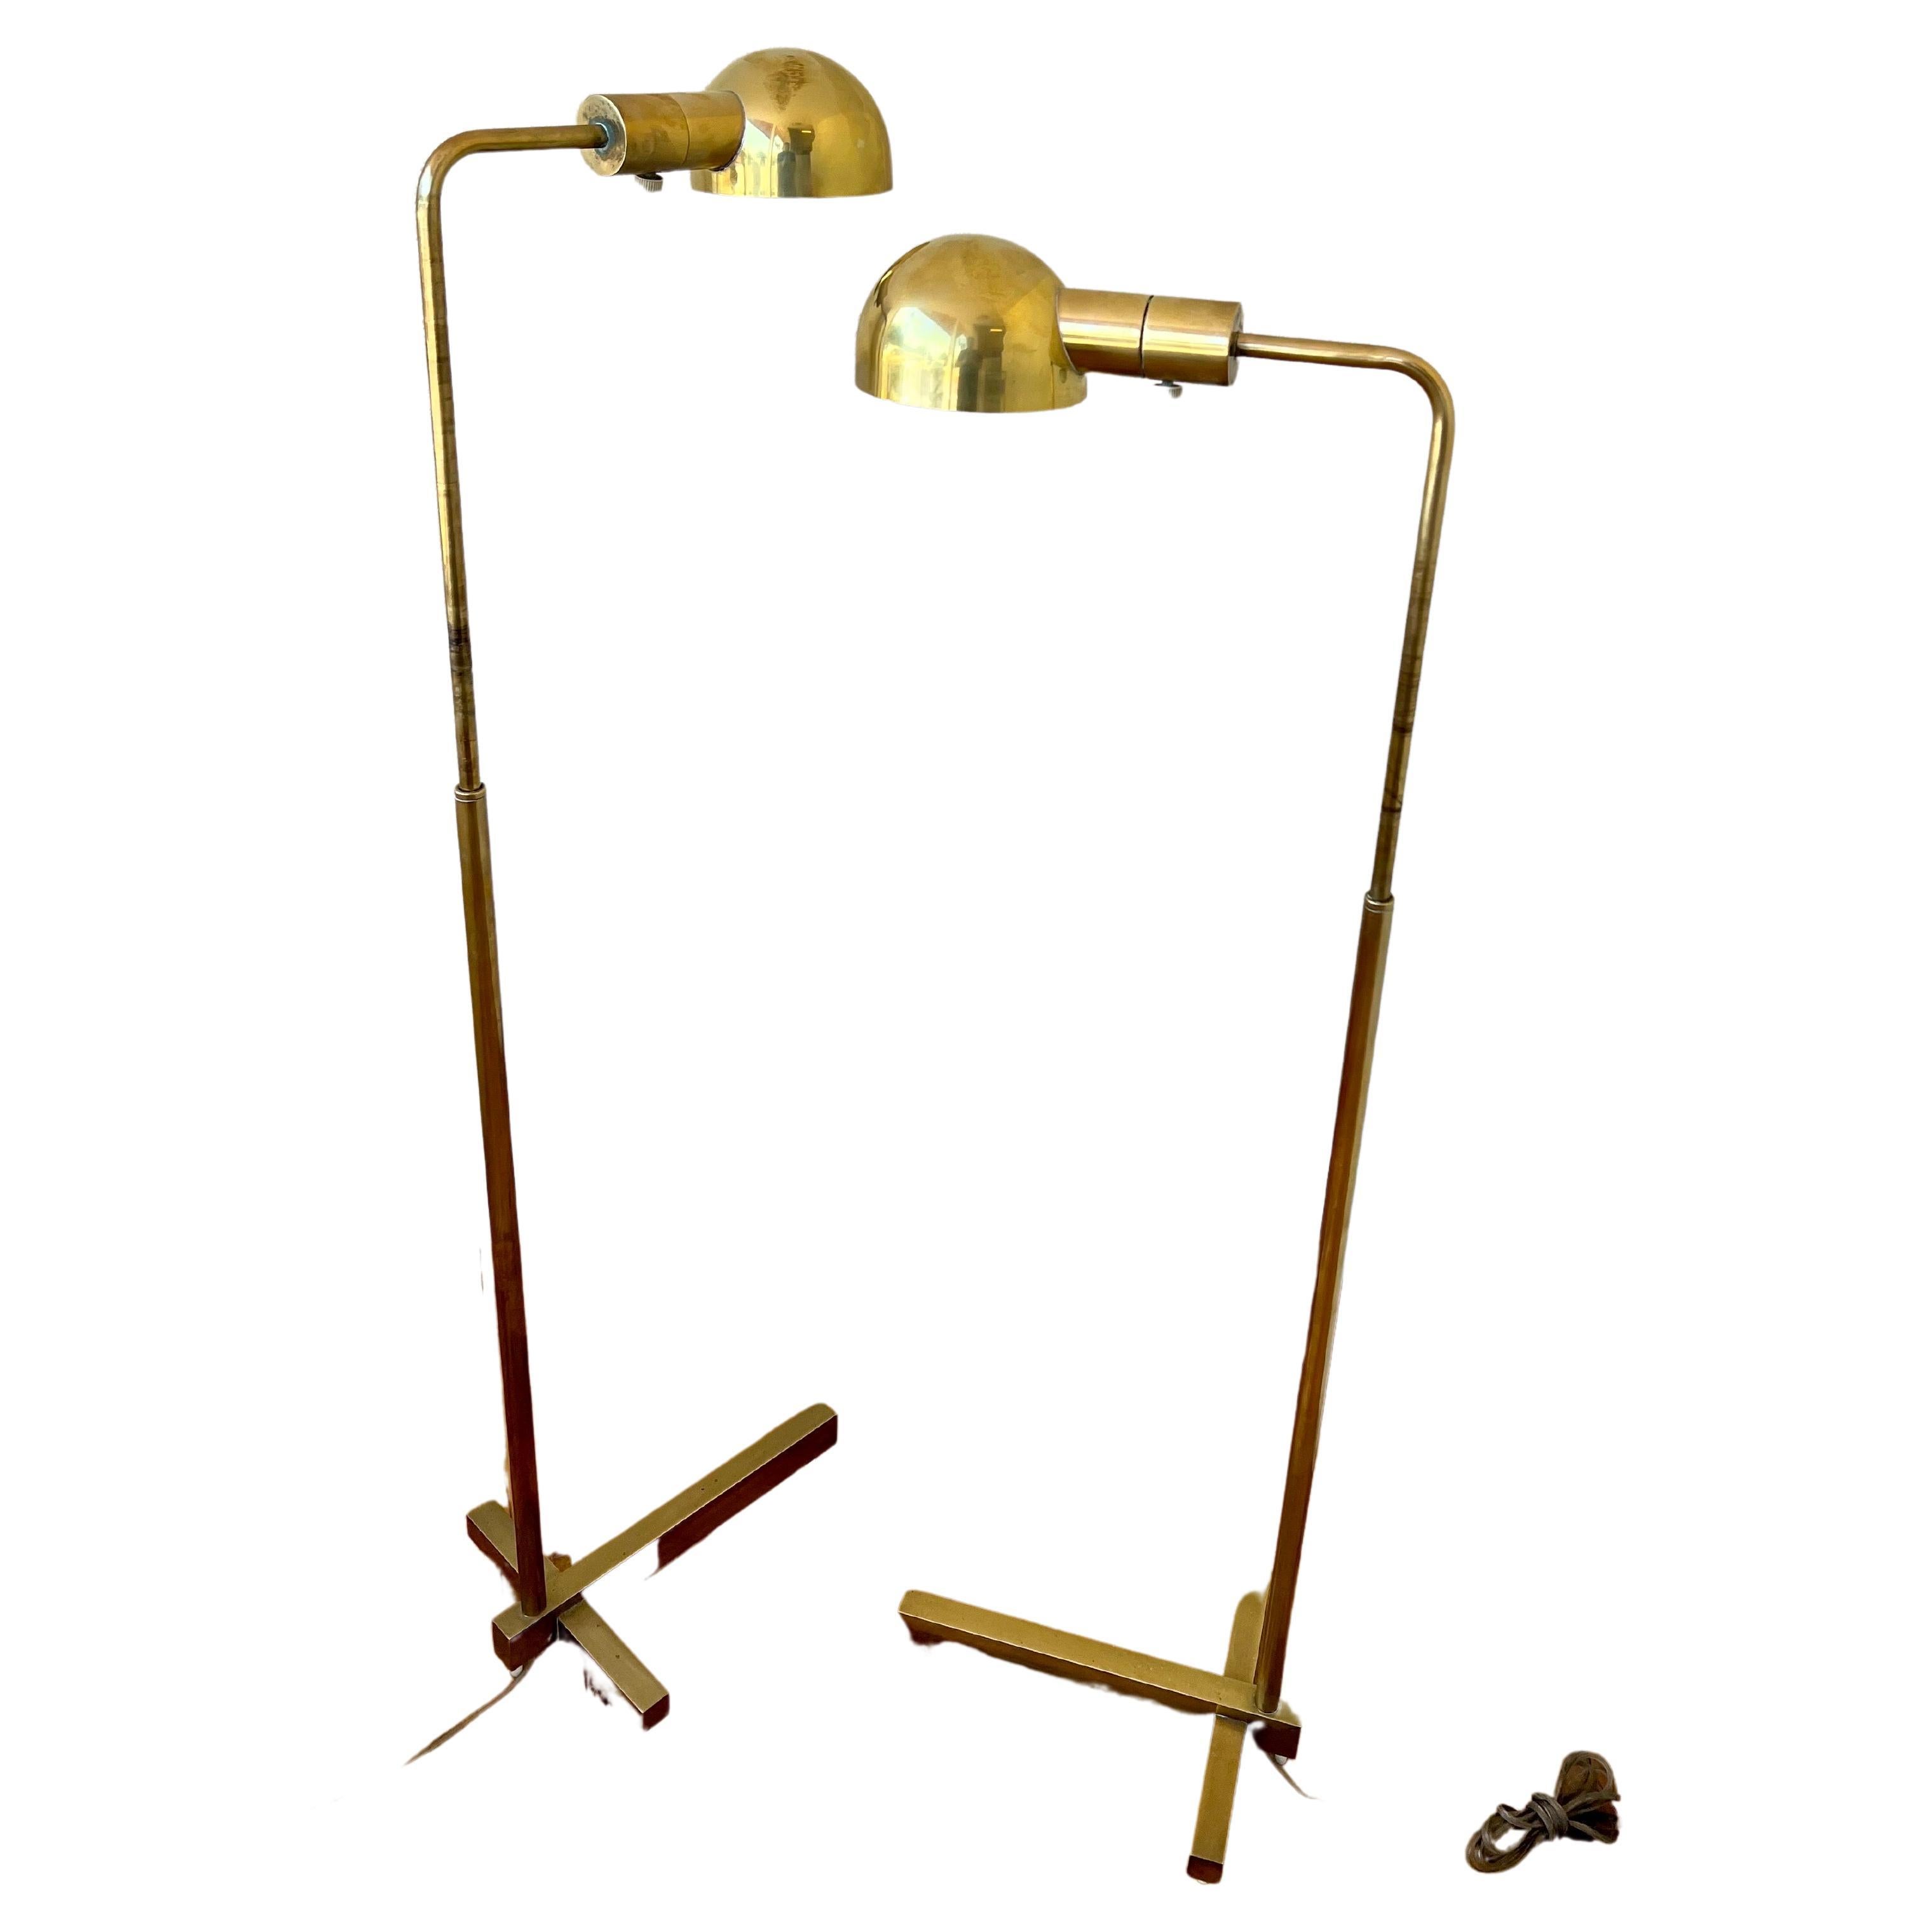 Great set of floor lamps by Casella lighting circa 1970s. in polished brass, with a dimmer switch, the shades rotate all the way also the pole rotates all the way and goes up and down, It reaches 51